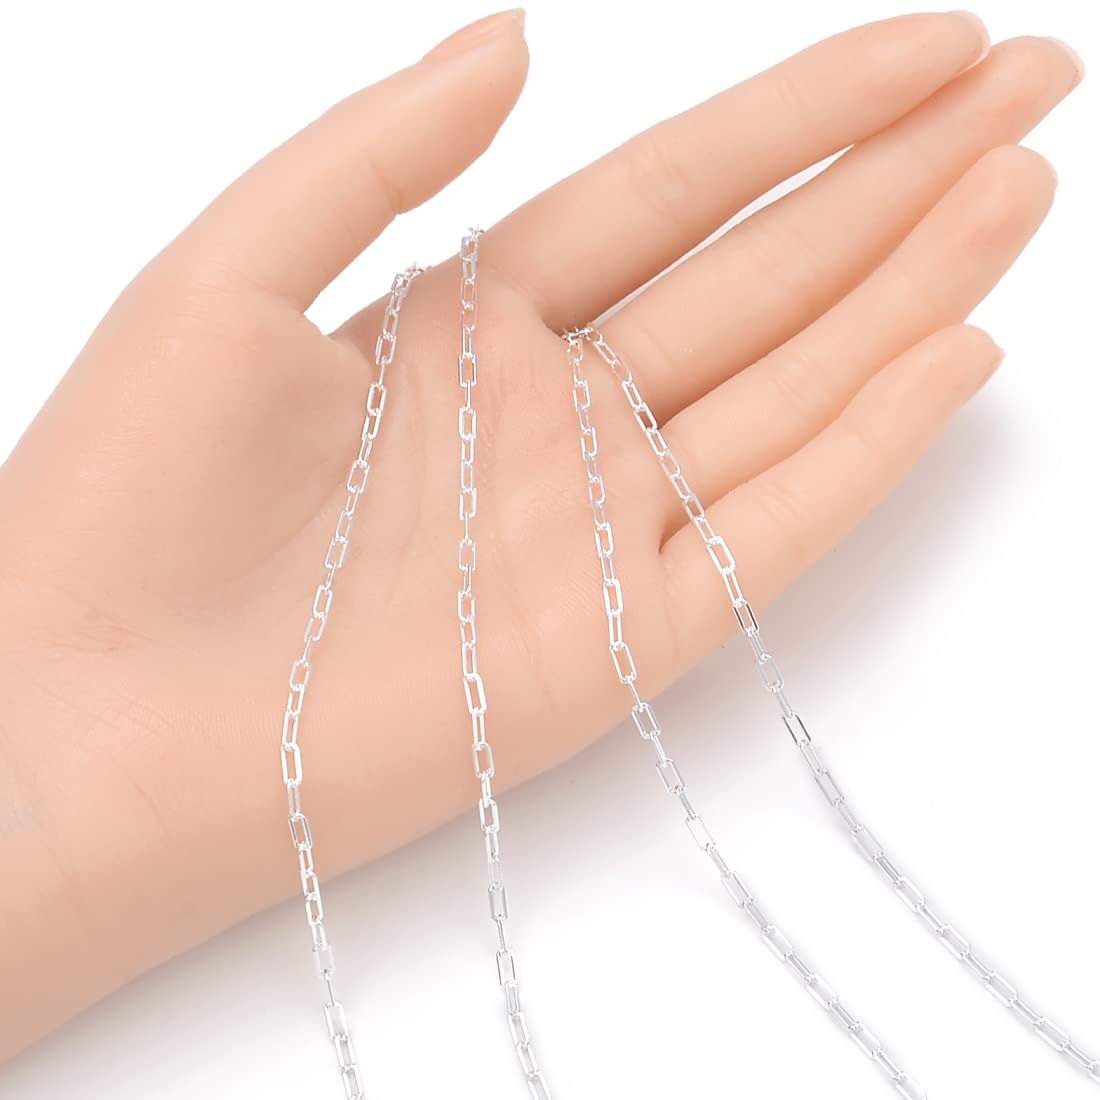 Adabele 5 Feet (60 Inch) Authentic 925 Sterling Silver Unfinished 2.5mm (0.1 Inch) Paperclip Link Drawn Cable Chain for Jewelry Making Nickel Free Hypoallergenic SSK-D1